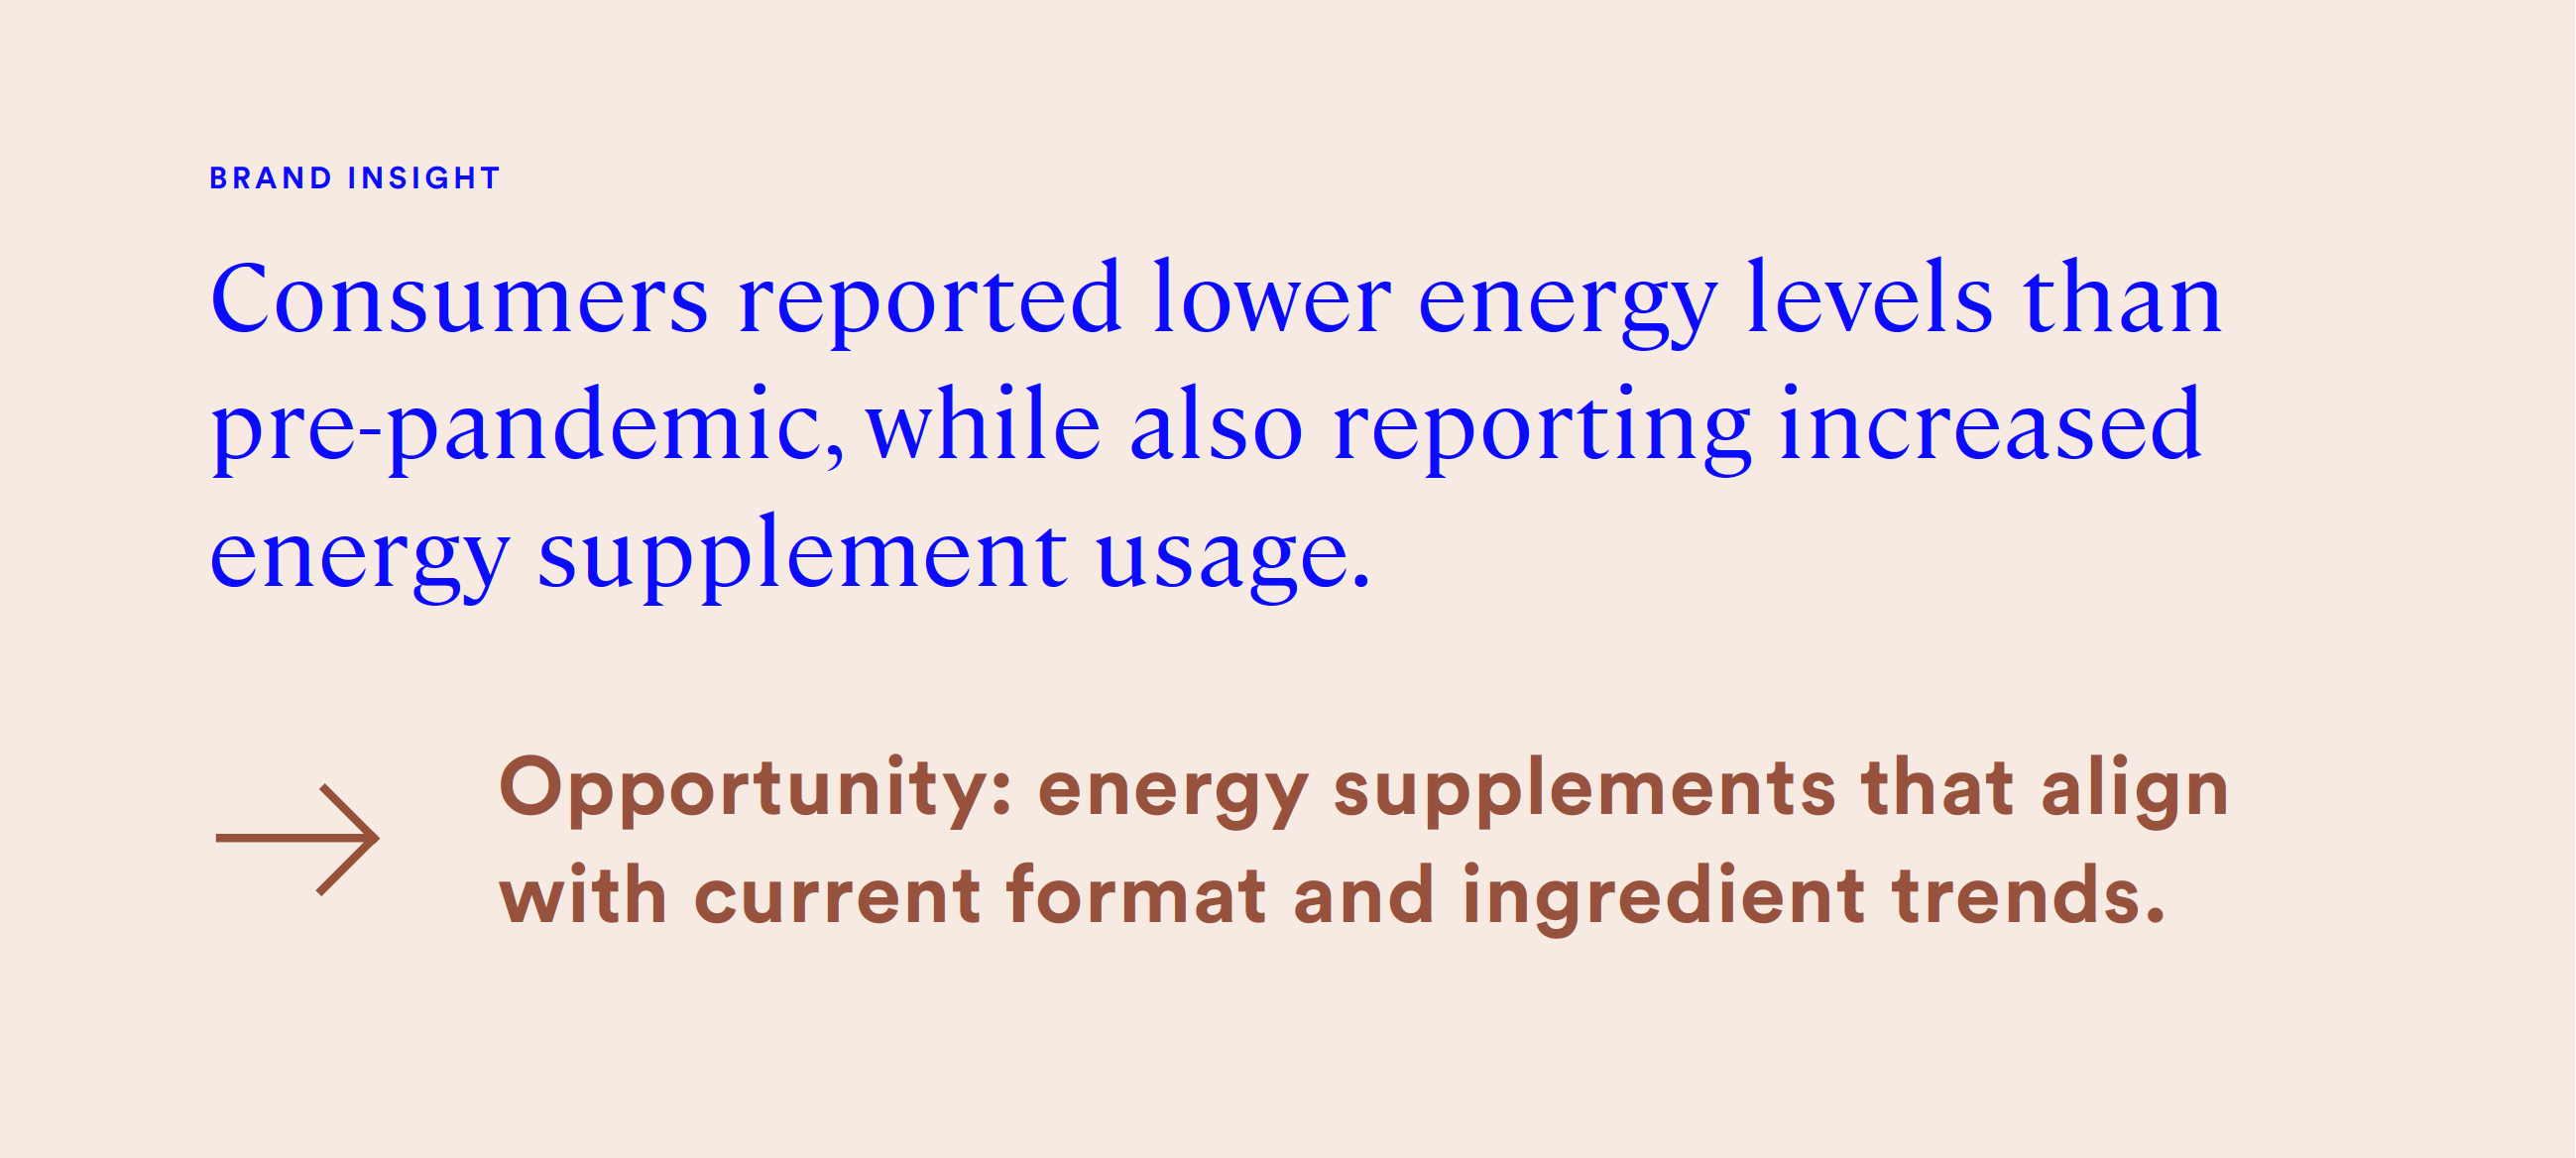 consumers reported lower energy levels than pre-pandemic, while also reporting increased energy supplement usage